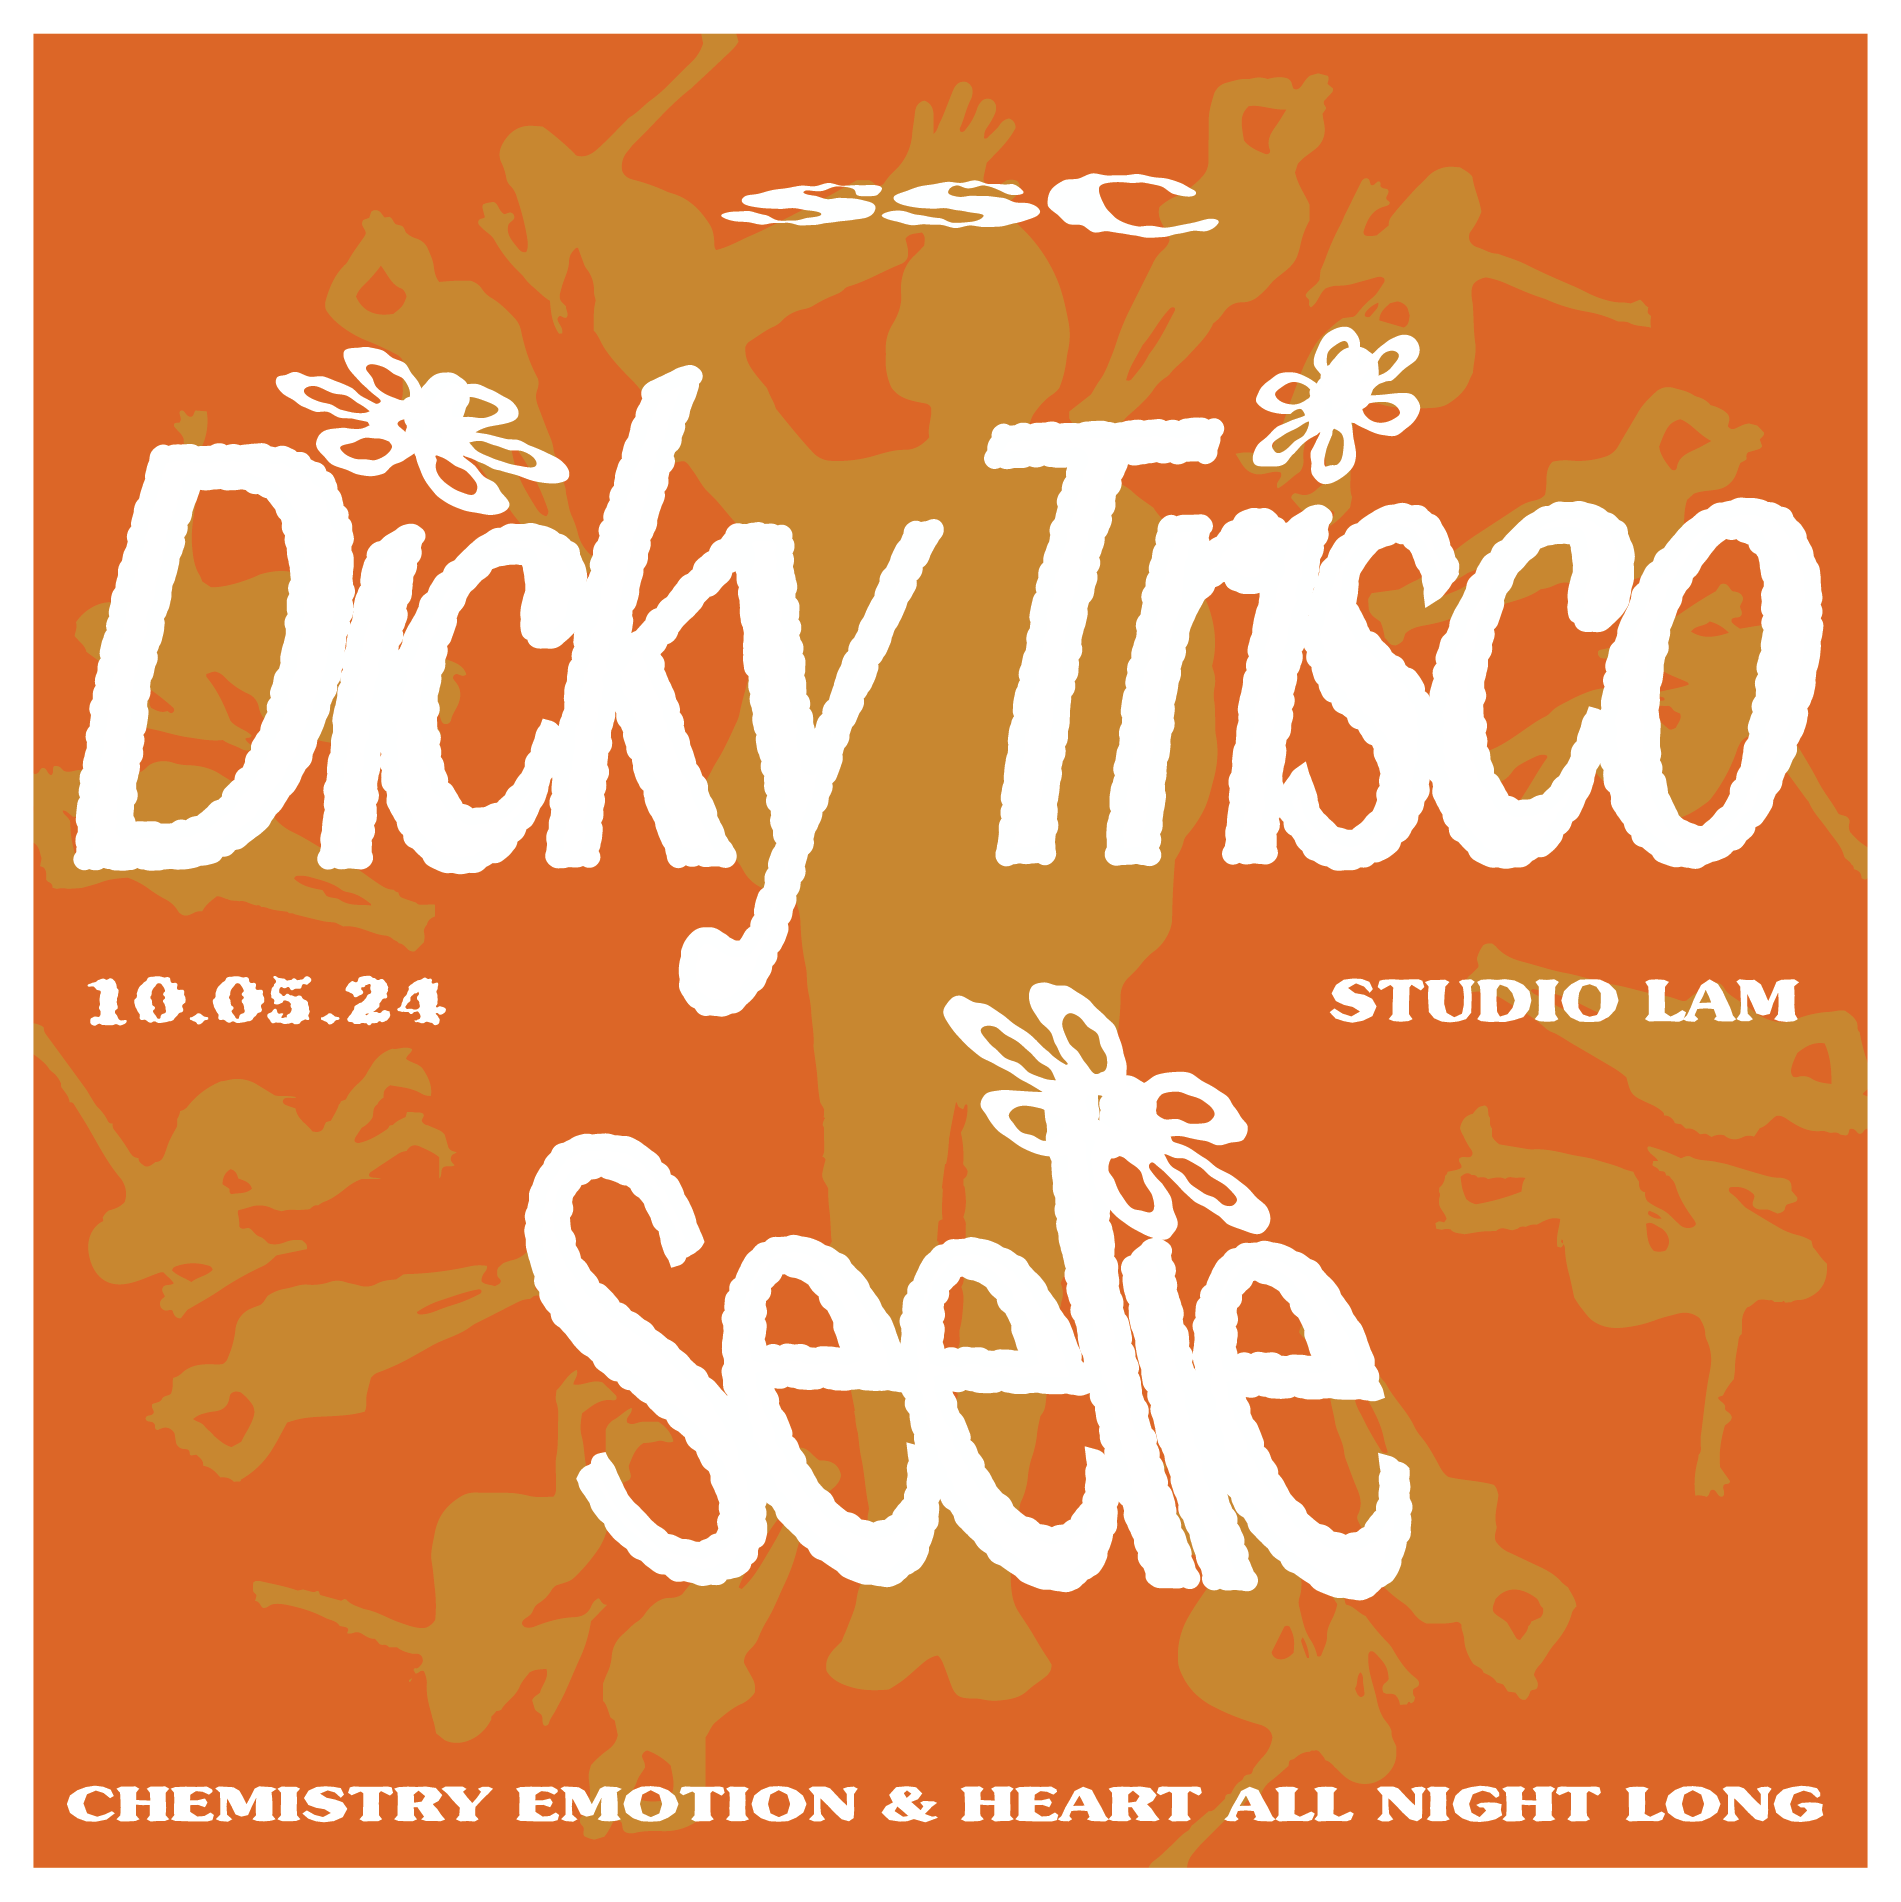 Siam Soul Club with DICKY TRISCO - フライヤー裏